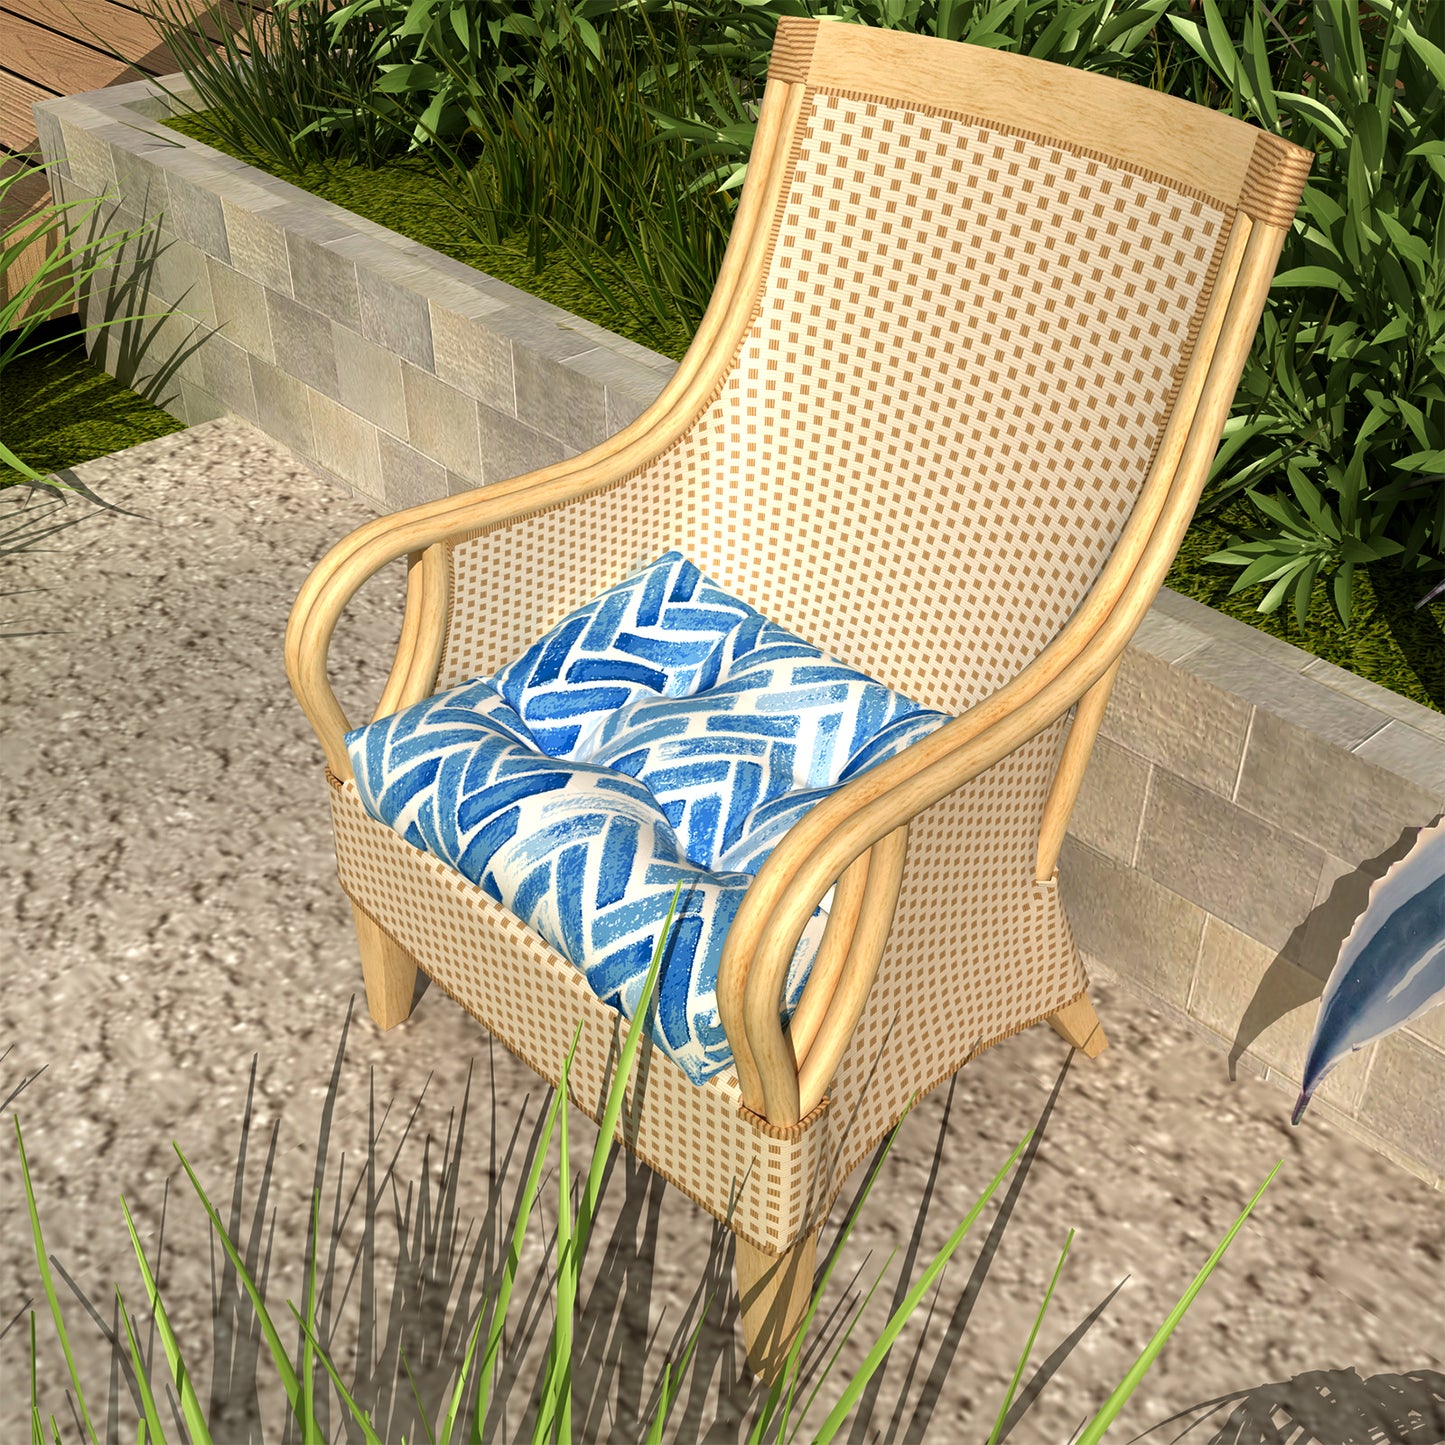 Melody Elephant Indoor/Outdoor Square Tufted Seat Cushions with Ties, Fade Resistant Patio Wicker Thick Chair Pads Pack of 2, 19 x 19 x 5 Inch, Blue Bricks